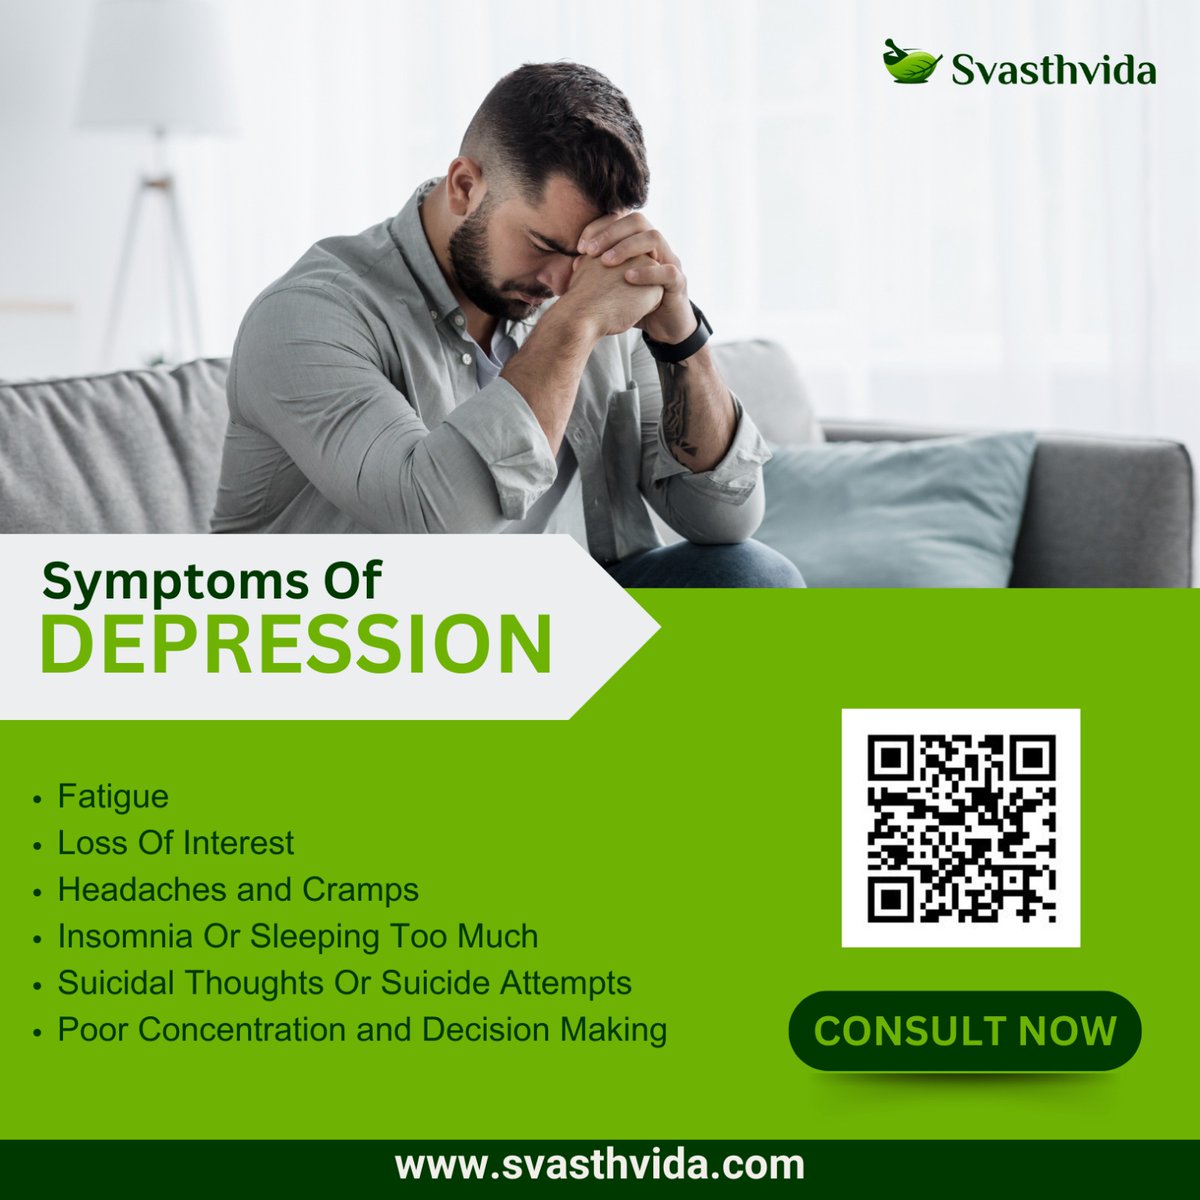 Recognizing the Signs of Depression?
Let's talk about it with Swasthvida🌿
Ayurveda can help beat depression! 🌿✨
#mindbodyspirit #ayurveda #ayurvediclife #ayurvedicTreatment #depression #mentalhealth #holistichealing